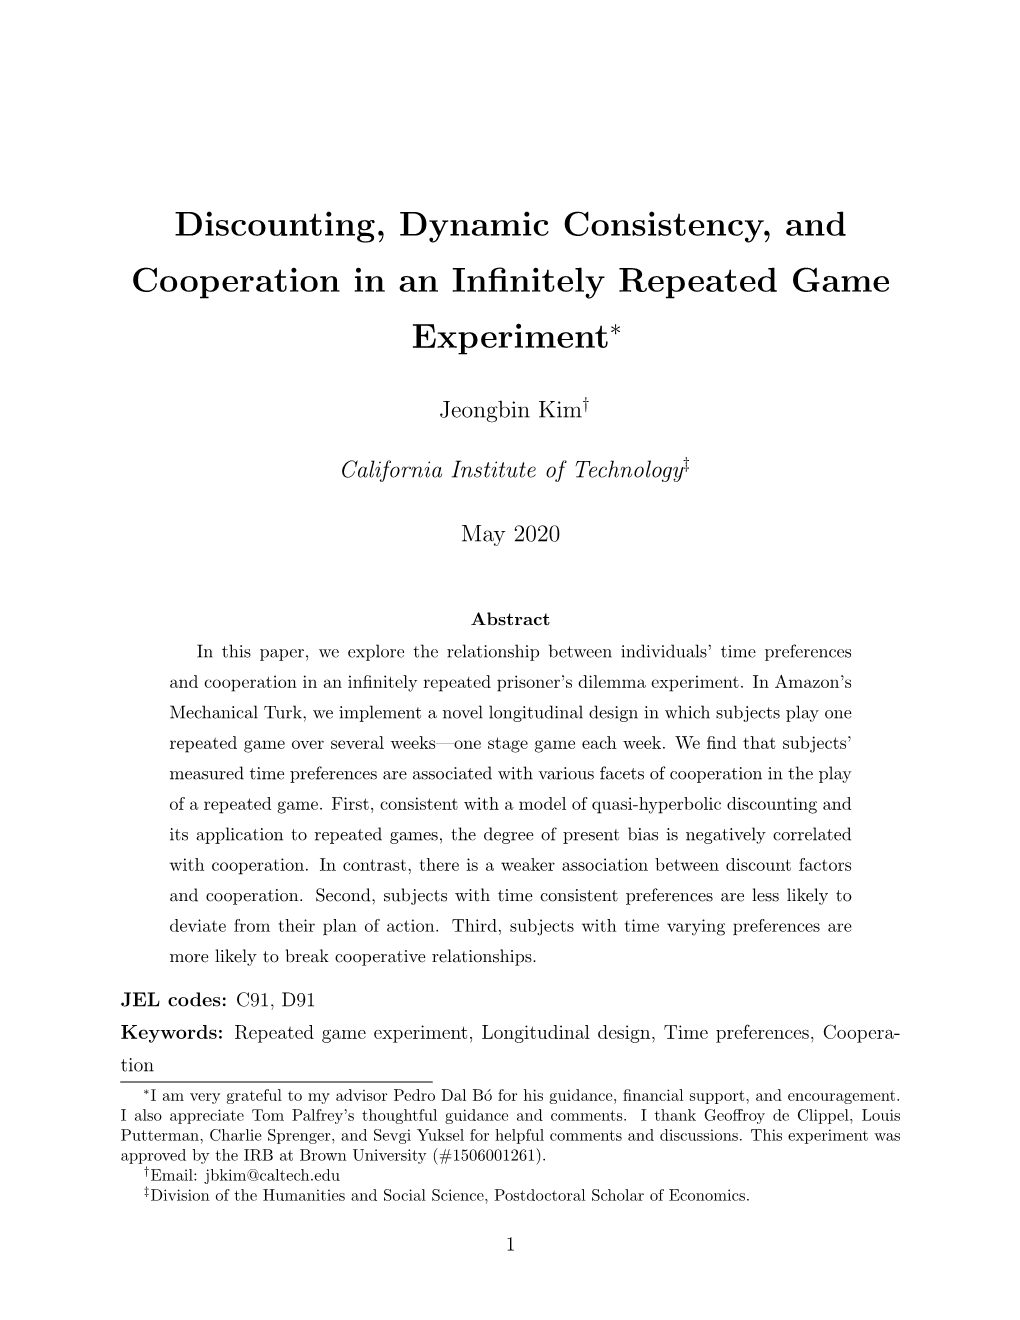 Discounting, Dynamic Consistency, and Cooperation in an Infinitely